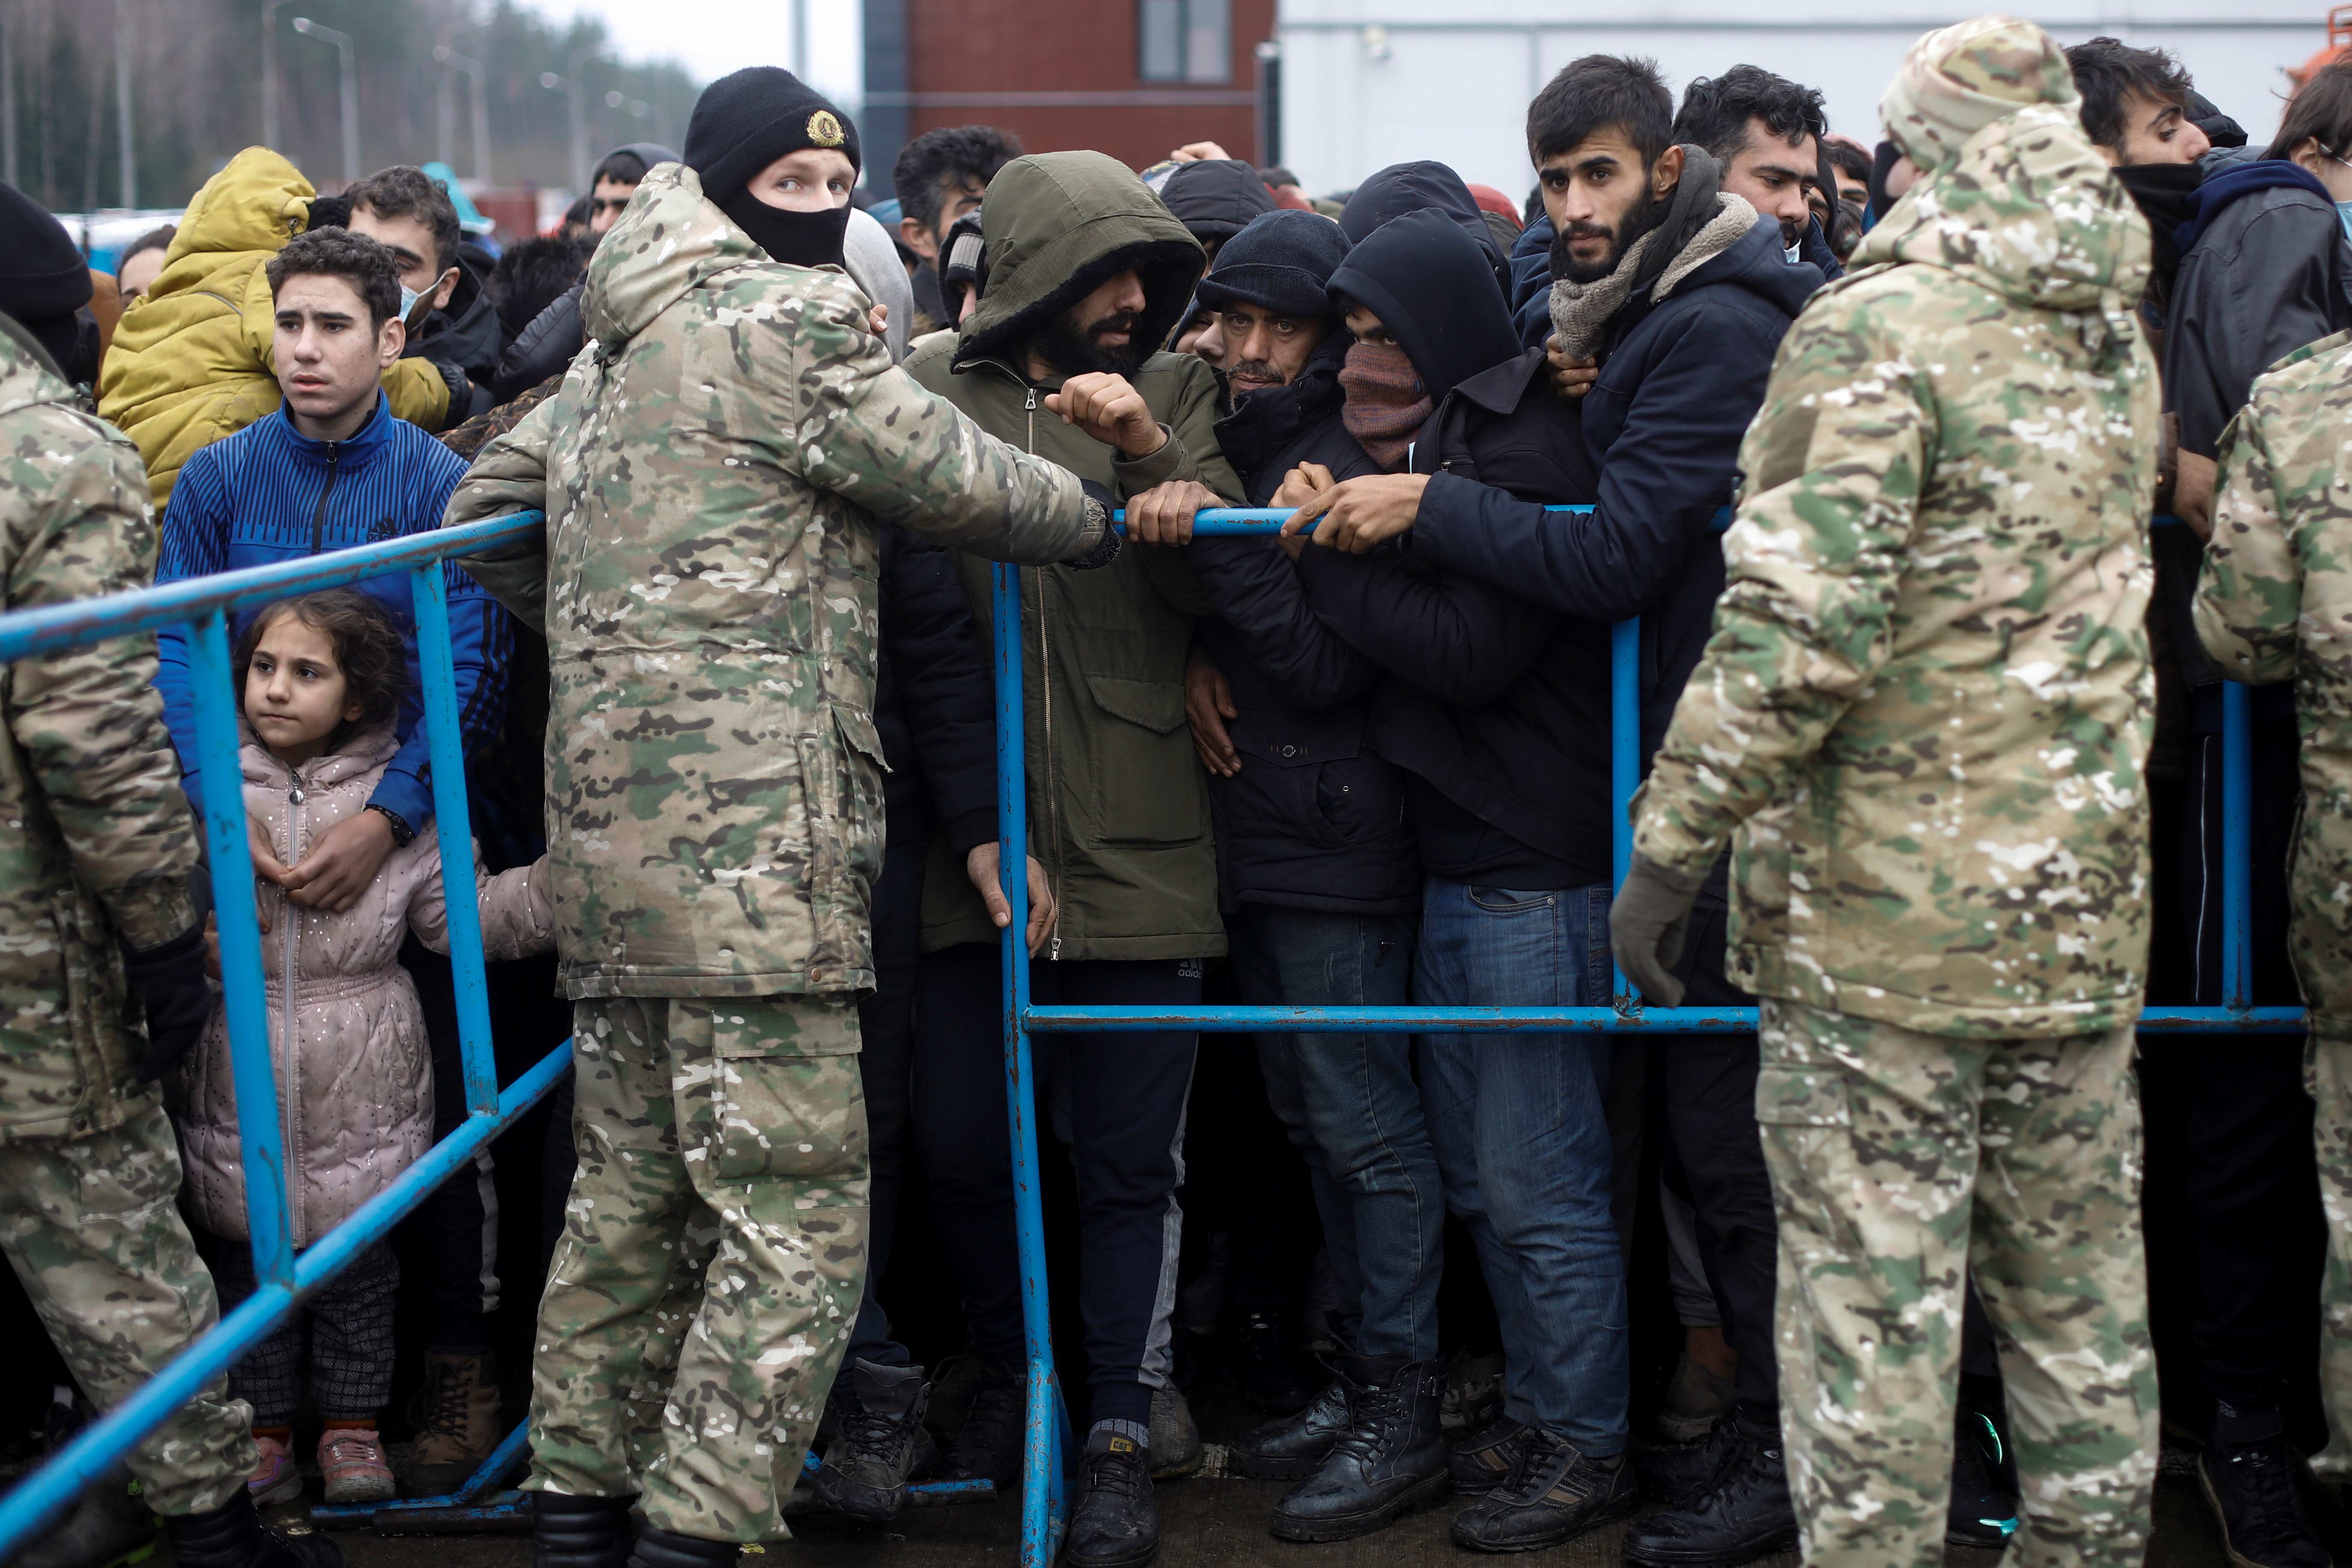 Migrants gather to receive food near the Belarusian-Polish border in the Grodno region